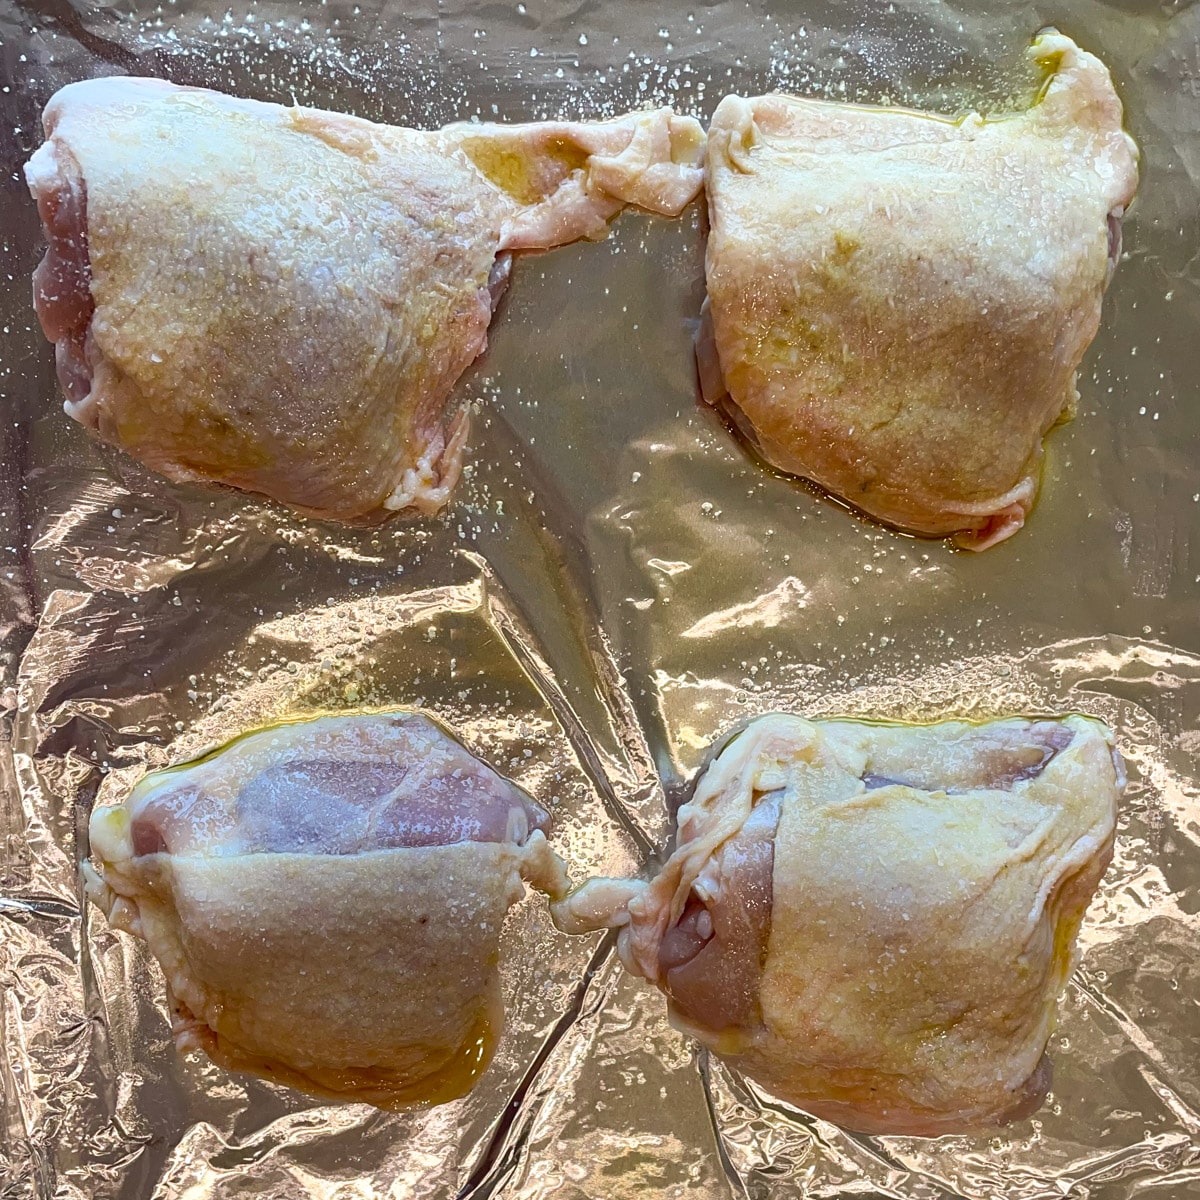 Salted bone-in, skin-on chicken thighs rubbed with olive oil sit on a sheet tray coated with a bit of olive oil.